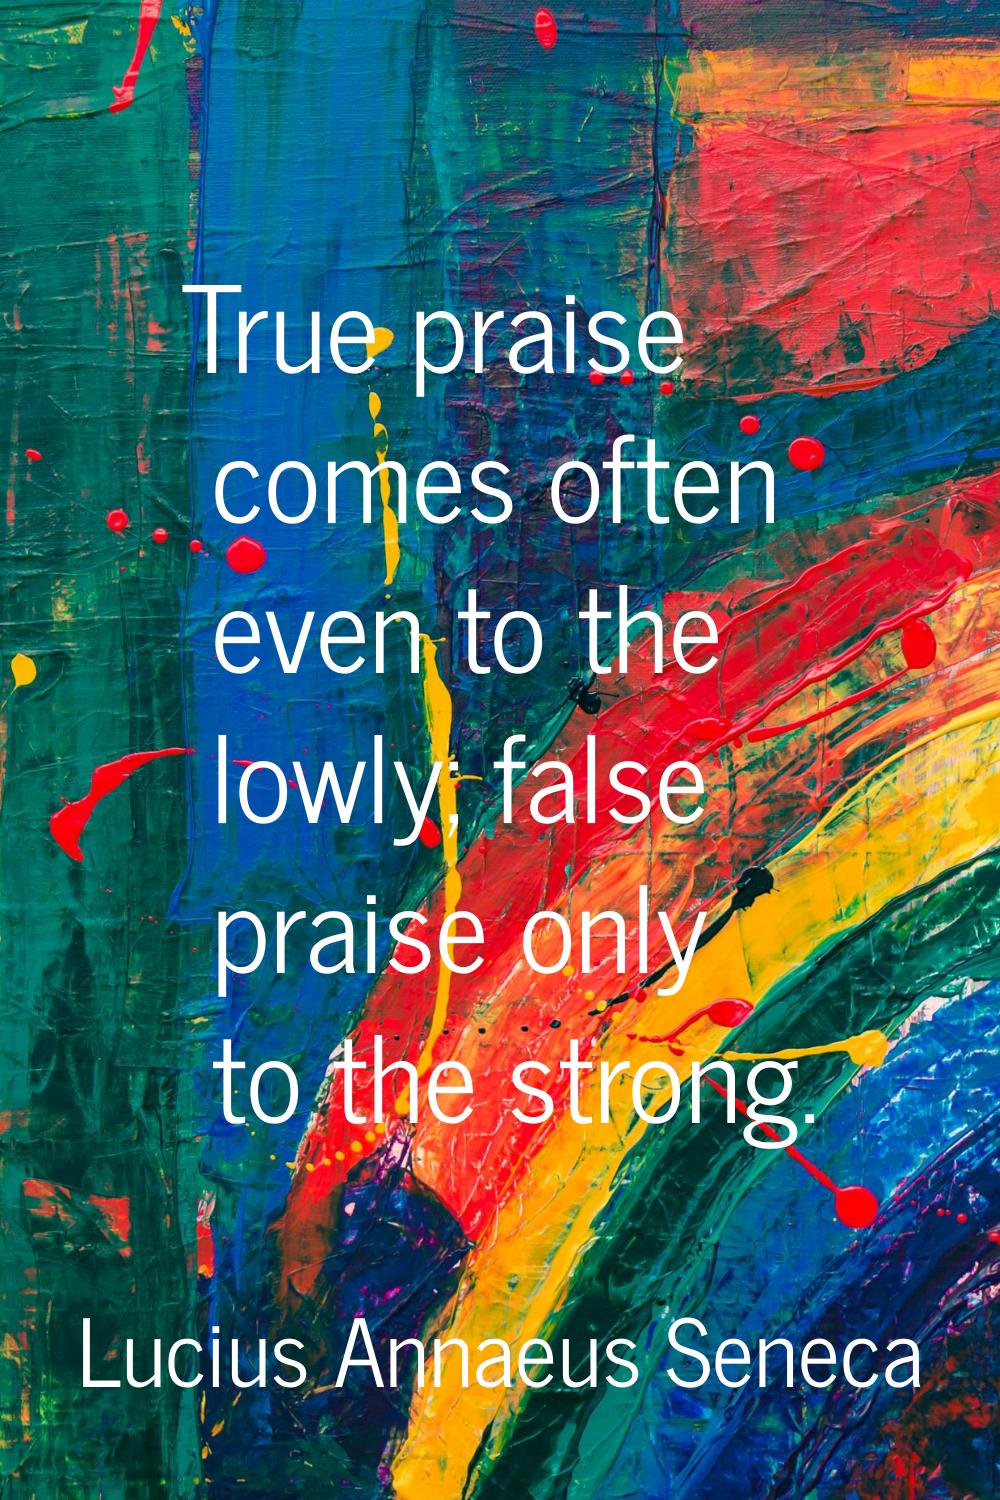 True praise comes often even to the lowly; false praise only to the strong.